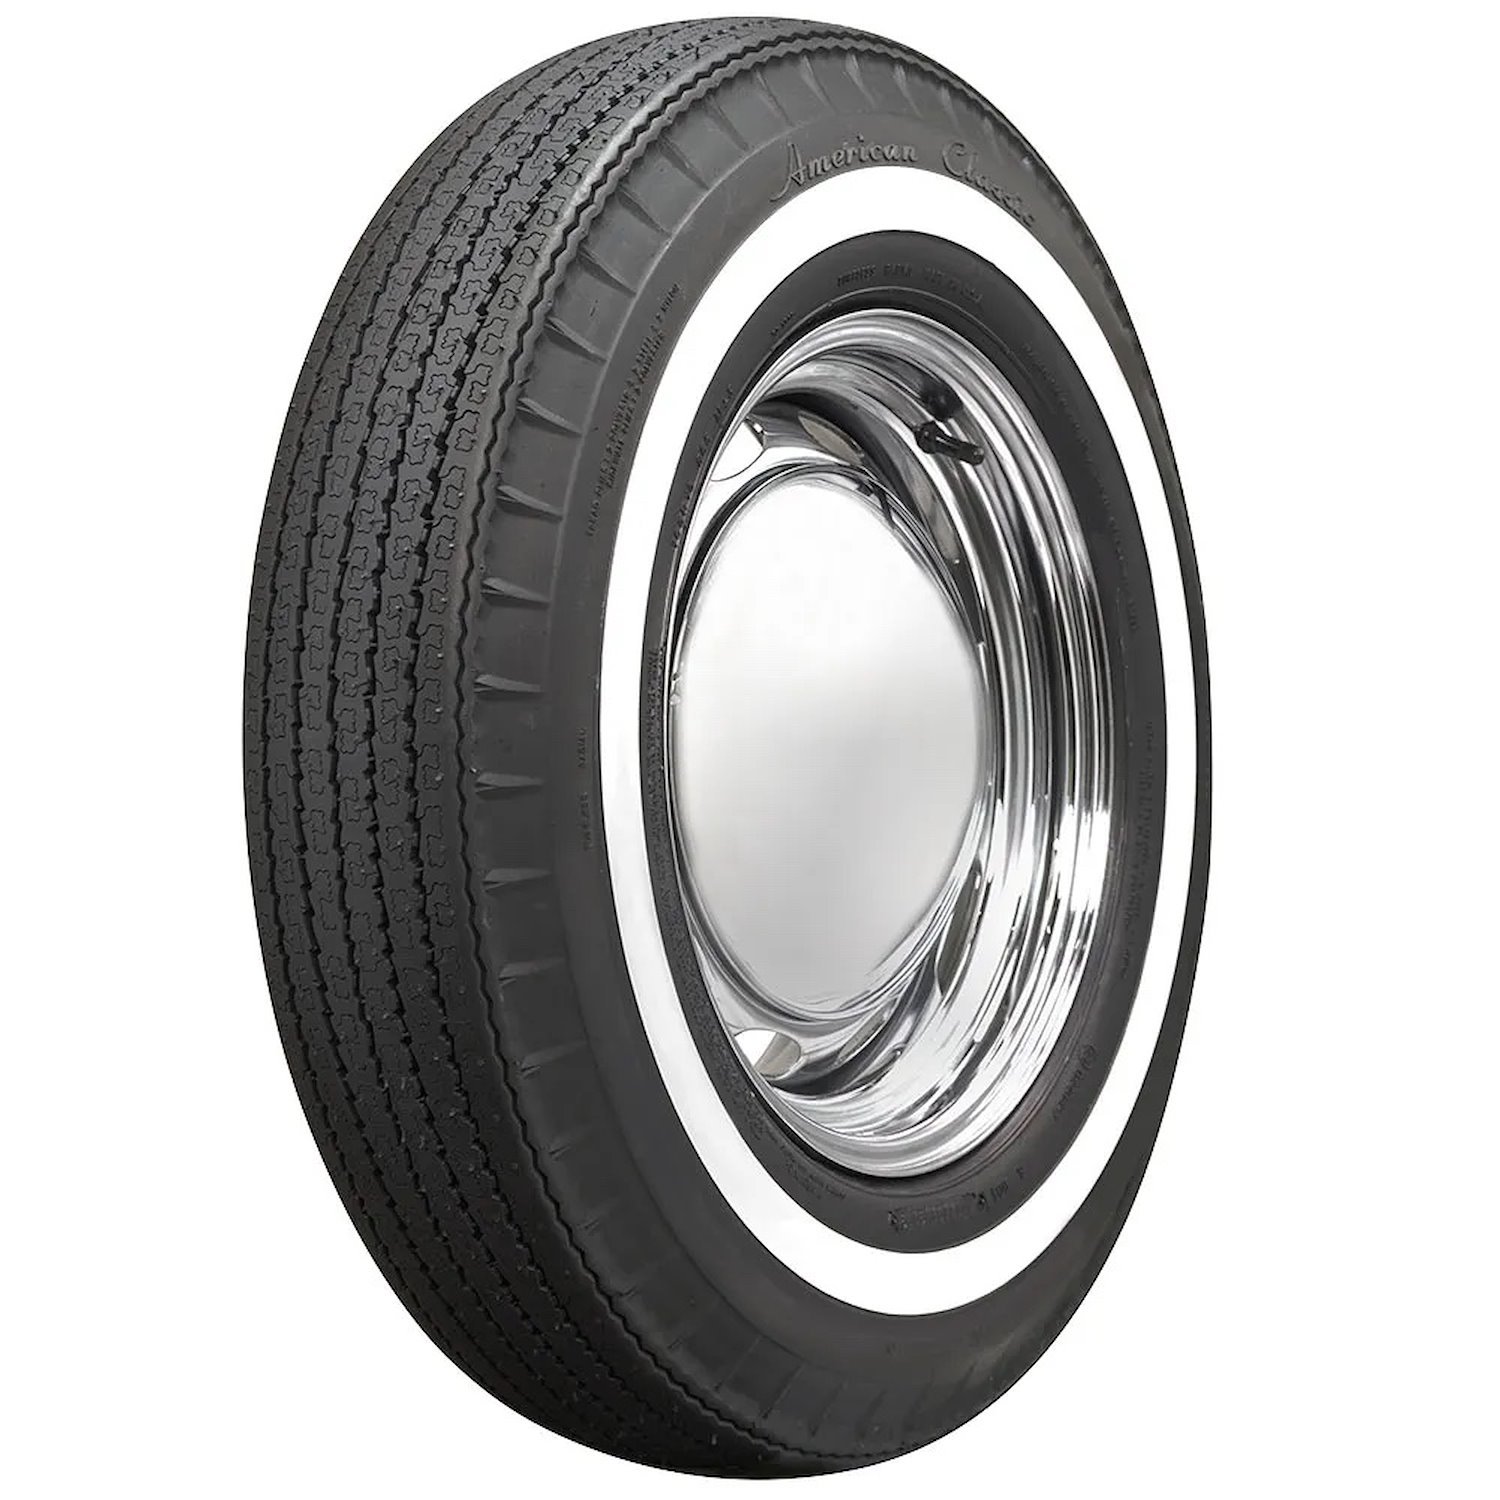 700319 Tire, American Classic Radial, 1-Inch Whitewall, 800R14